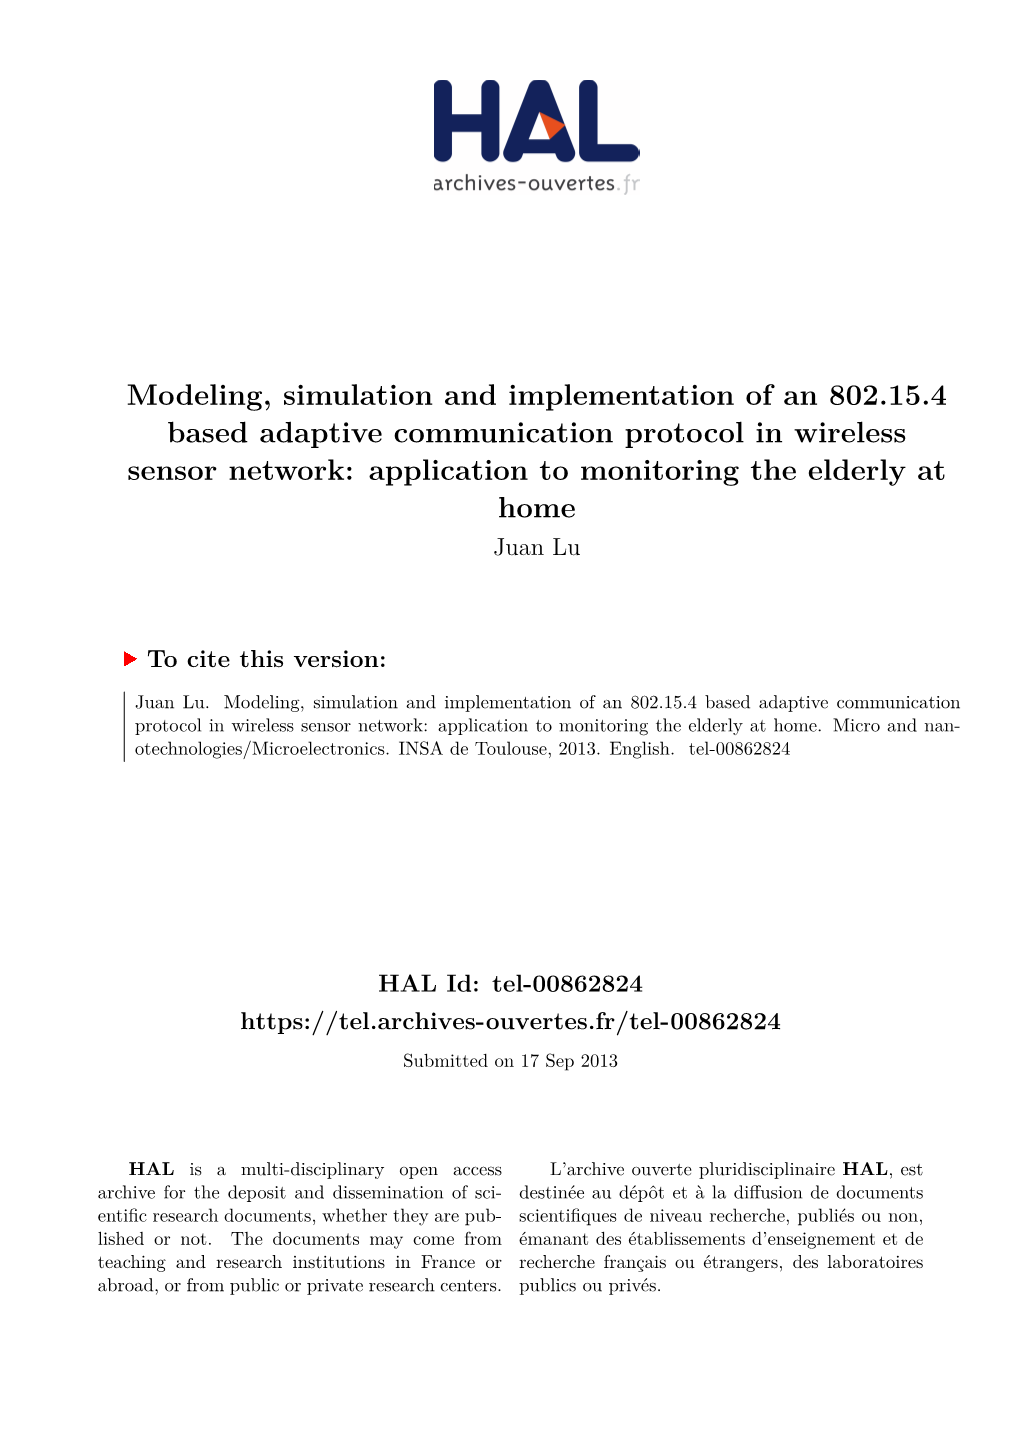 Modeling, Simulation and Implementation of an 802.15.4